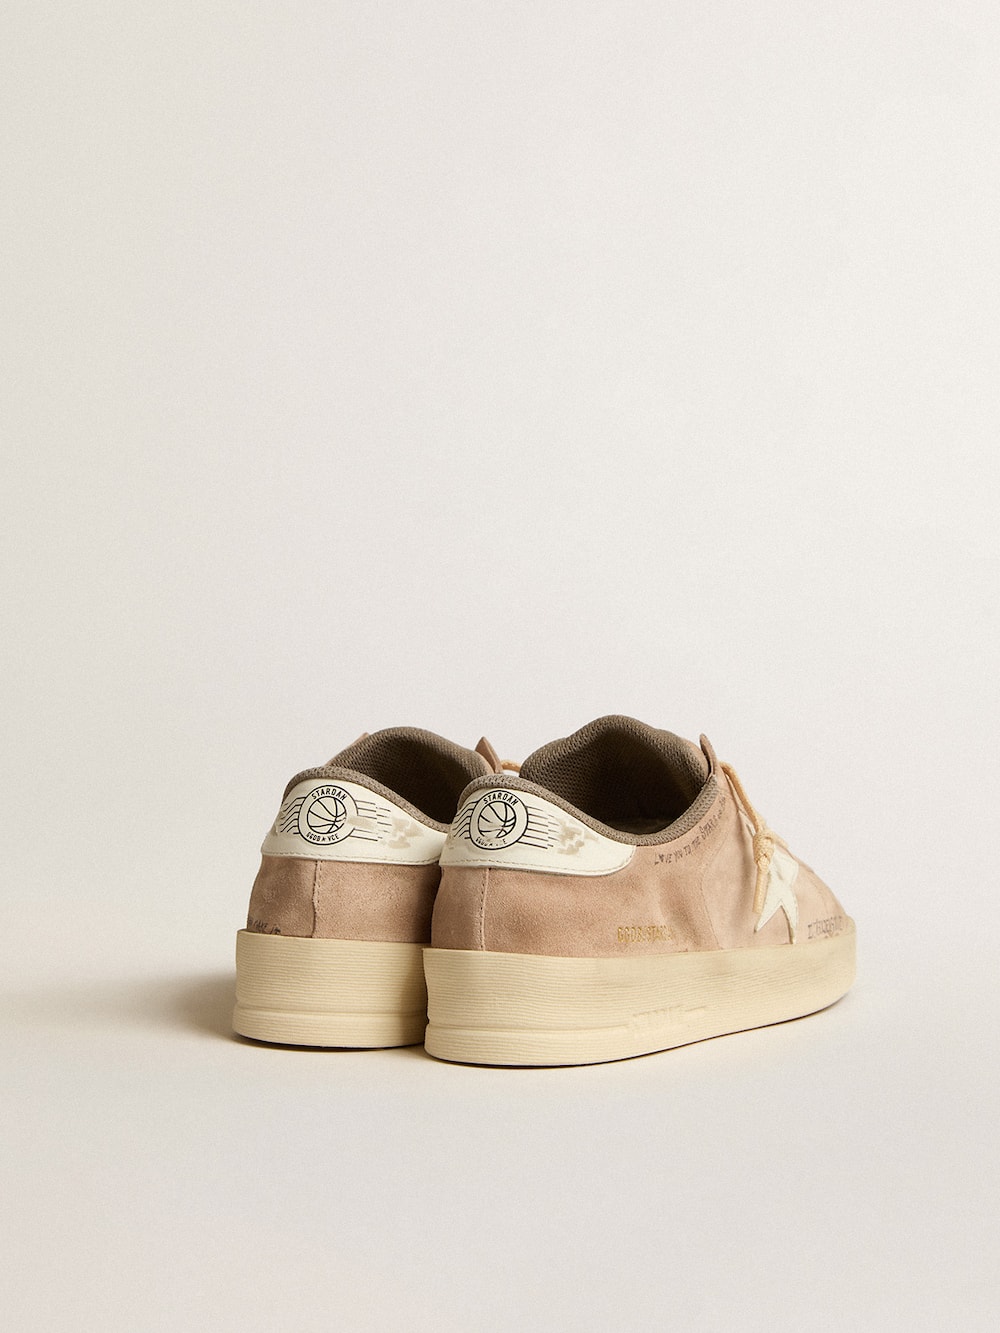 Golden Goose - Stardan in old rose suede with white leather star and heel tab in 